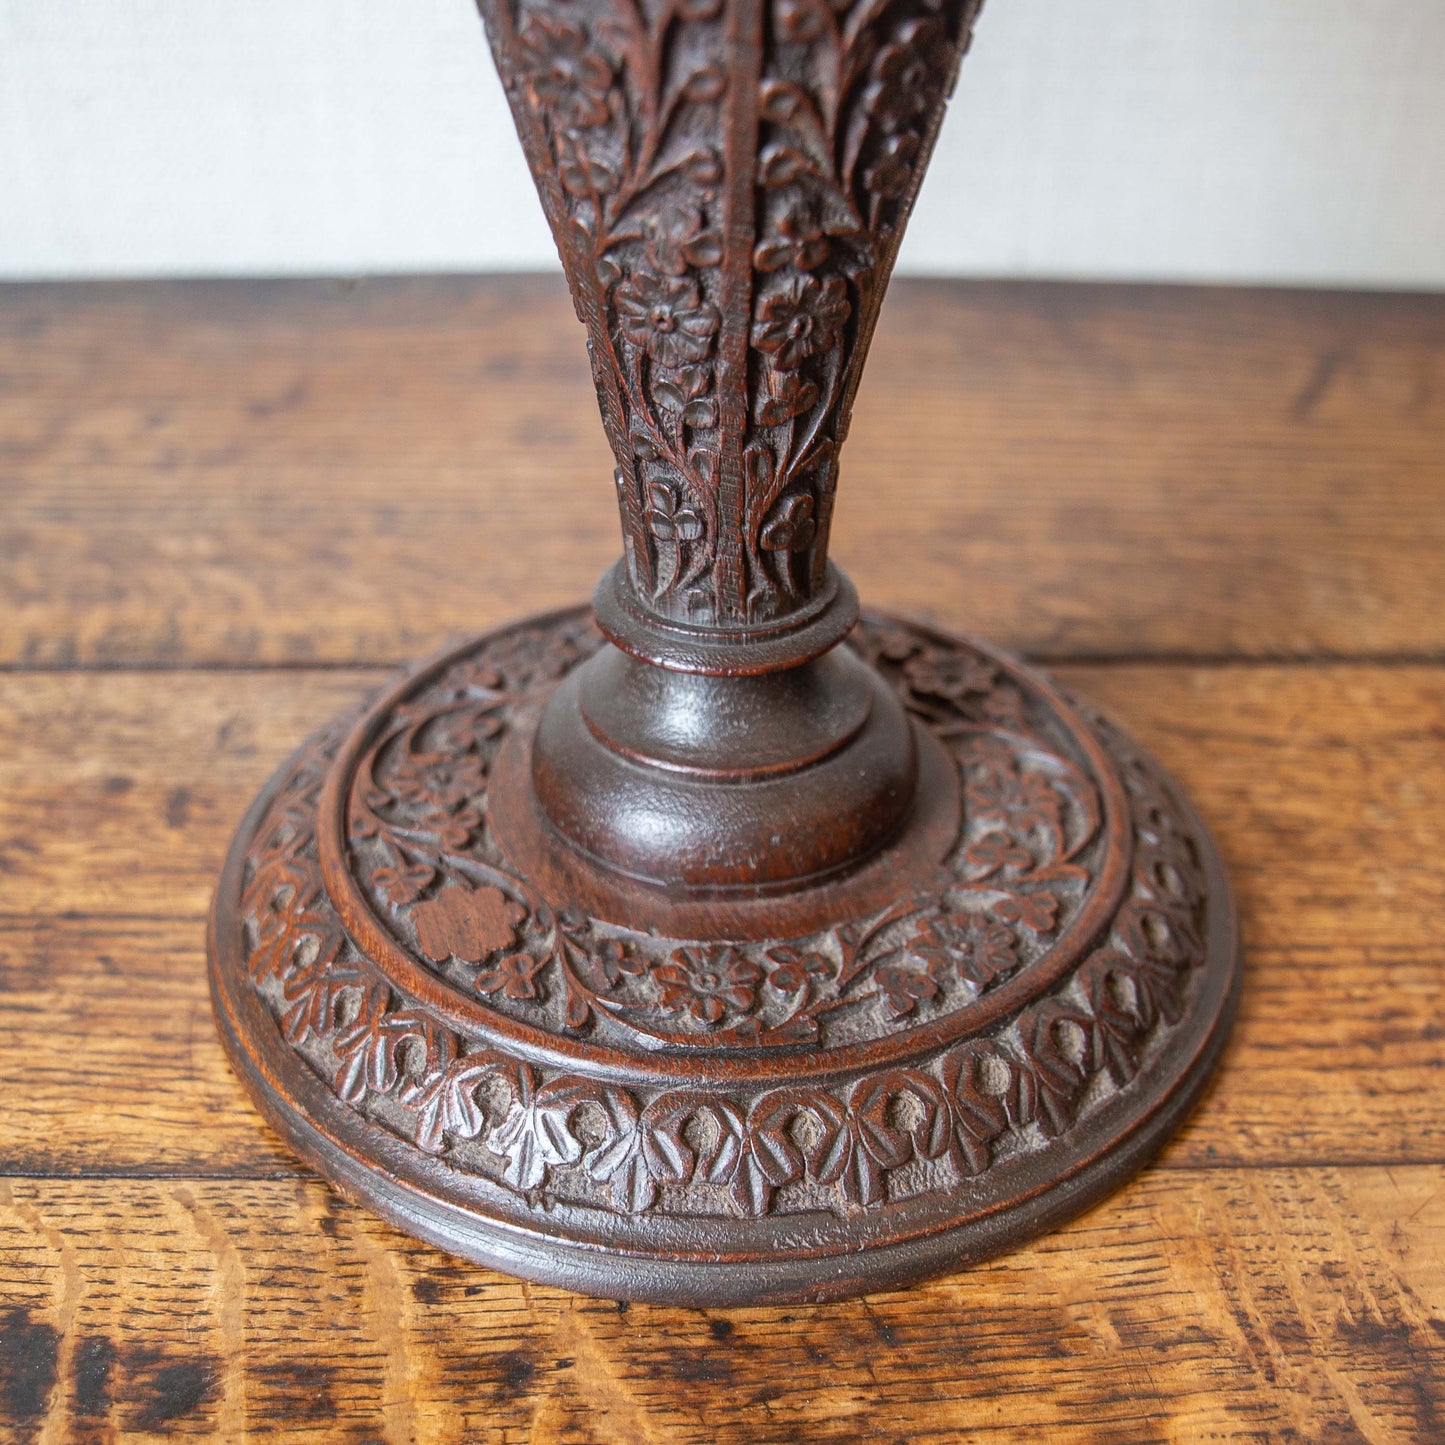 A SMALL CARVED BALUSTER LAMP